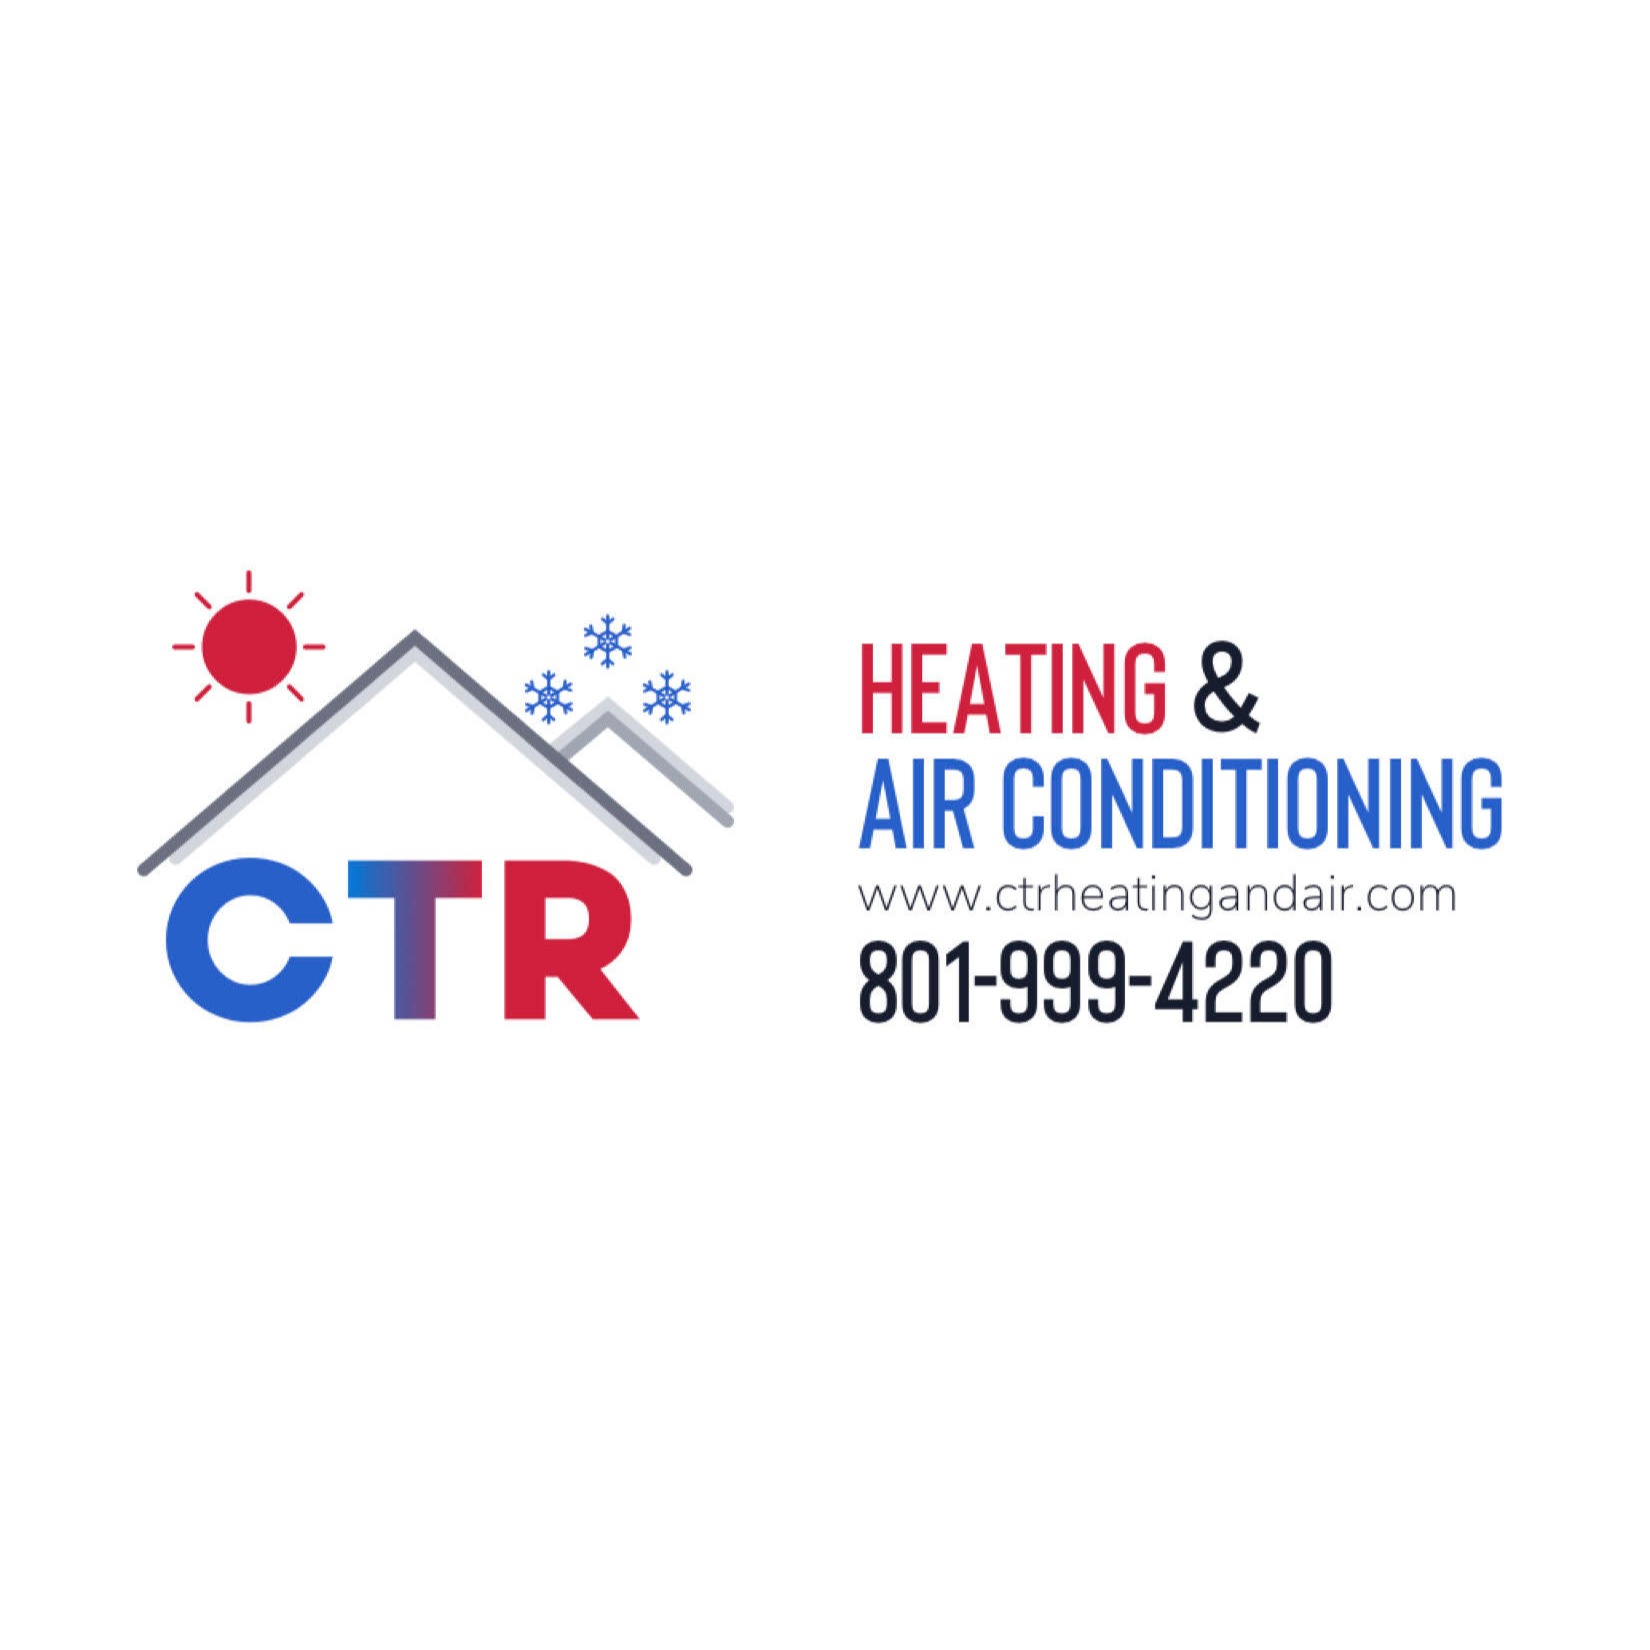 CTR Heating and Air Conditioning - South Jordan, UT 84095 - (801)999-4220 | ShowMeLocal.com